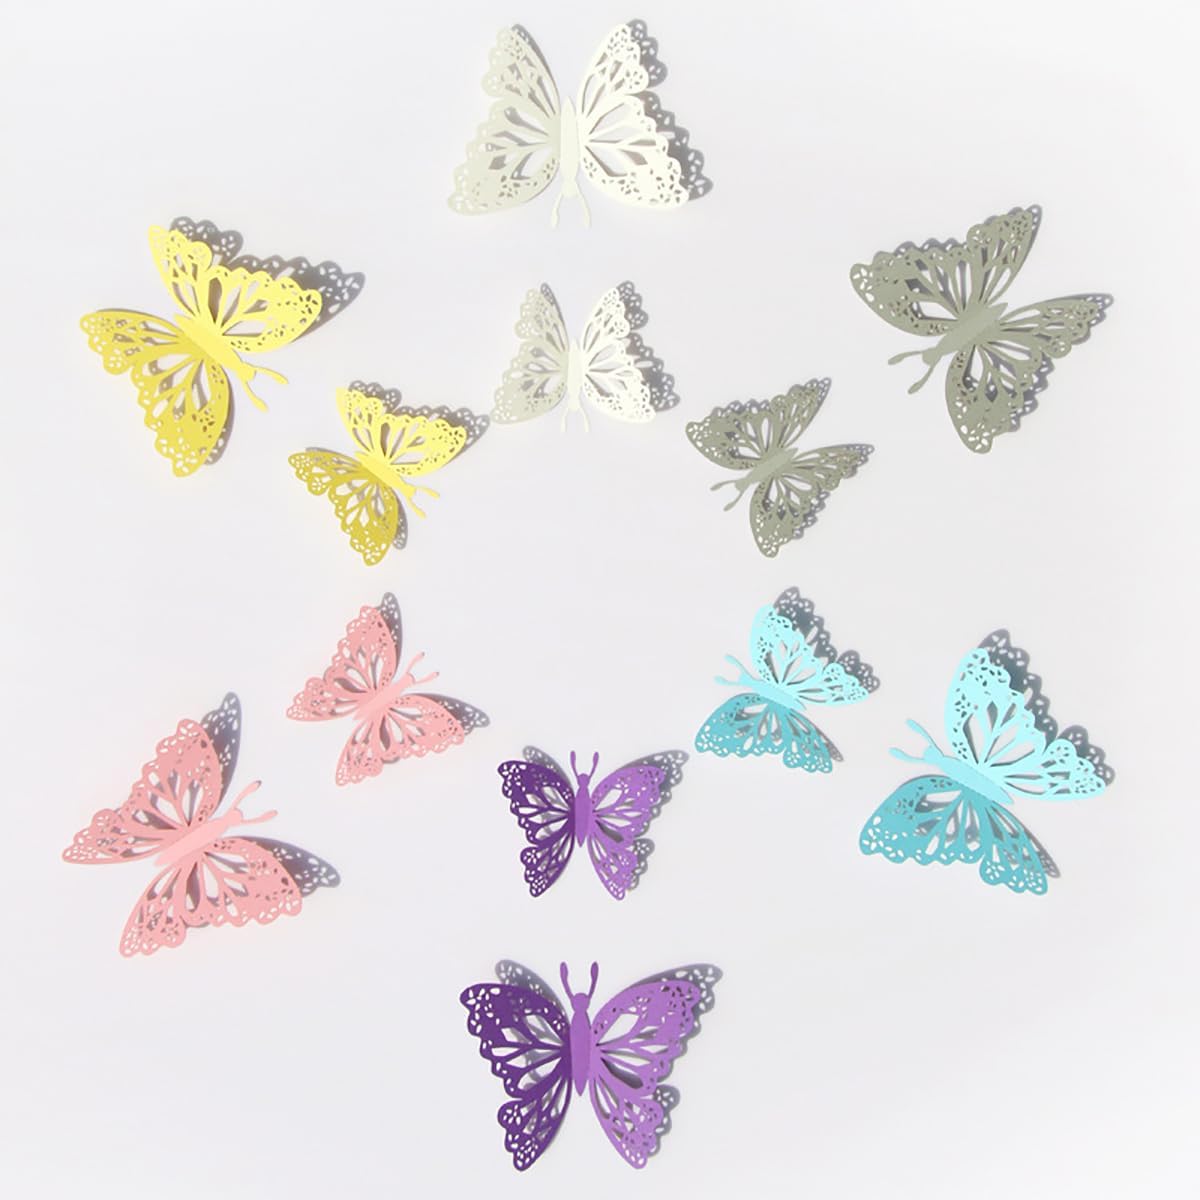 48PCS Butterfly Wall Decals Room Decor Wall Art 3D Butterflies Mural Sticker Home Decoration Kid Girl Bedroom Bathroom Nursery Classroom Office Party Removable Decorative